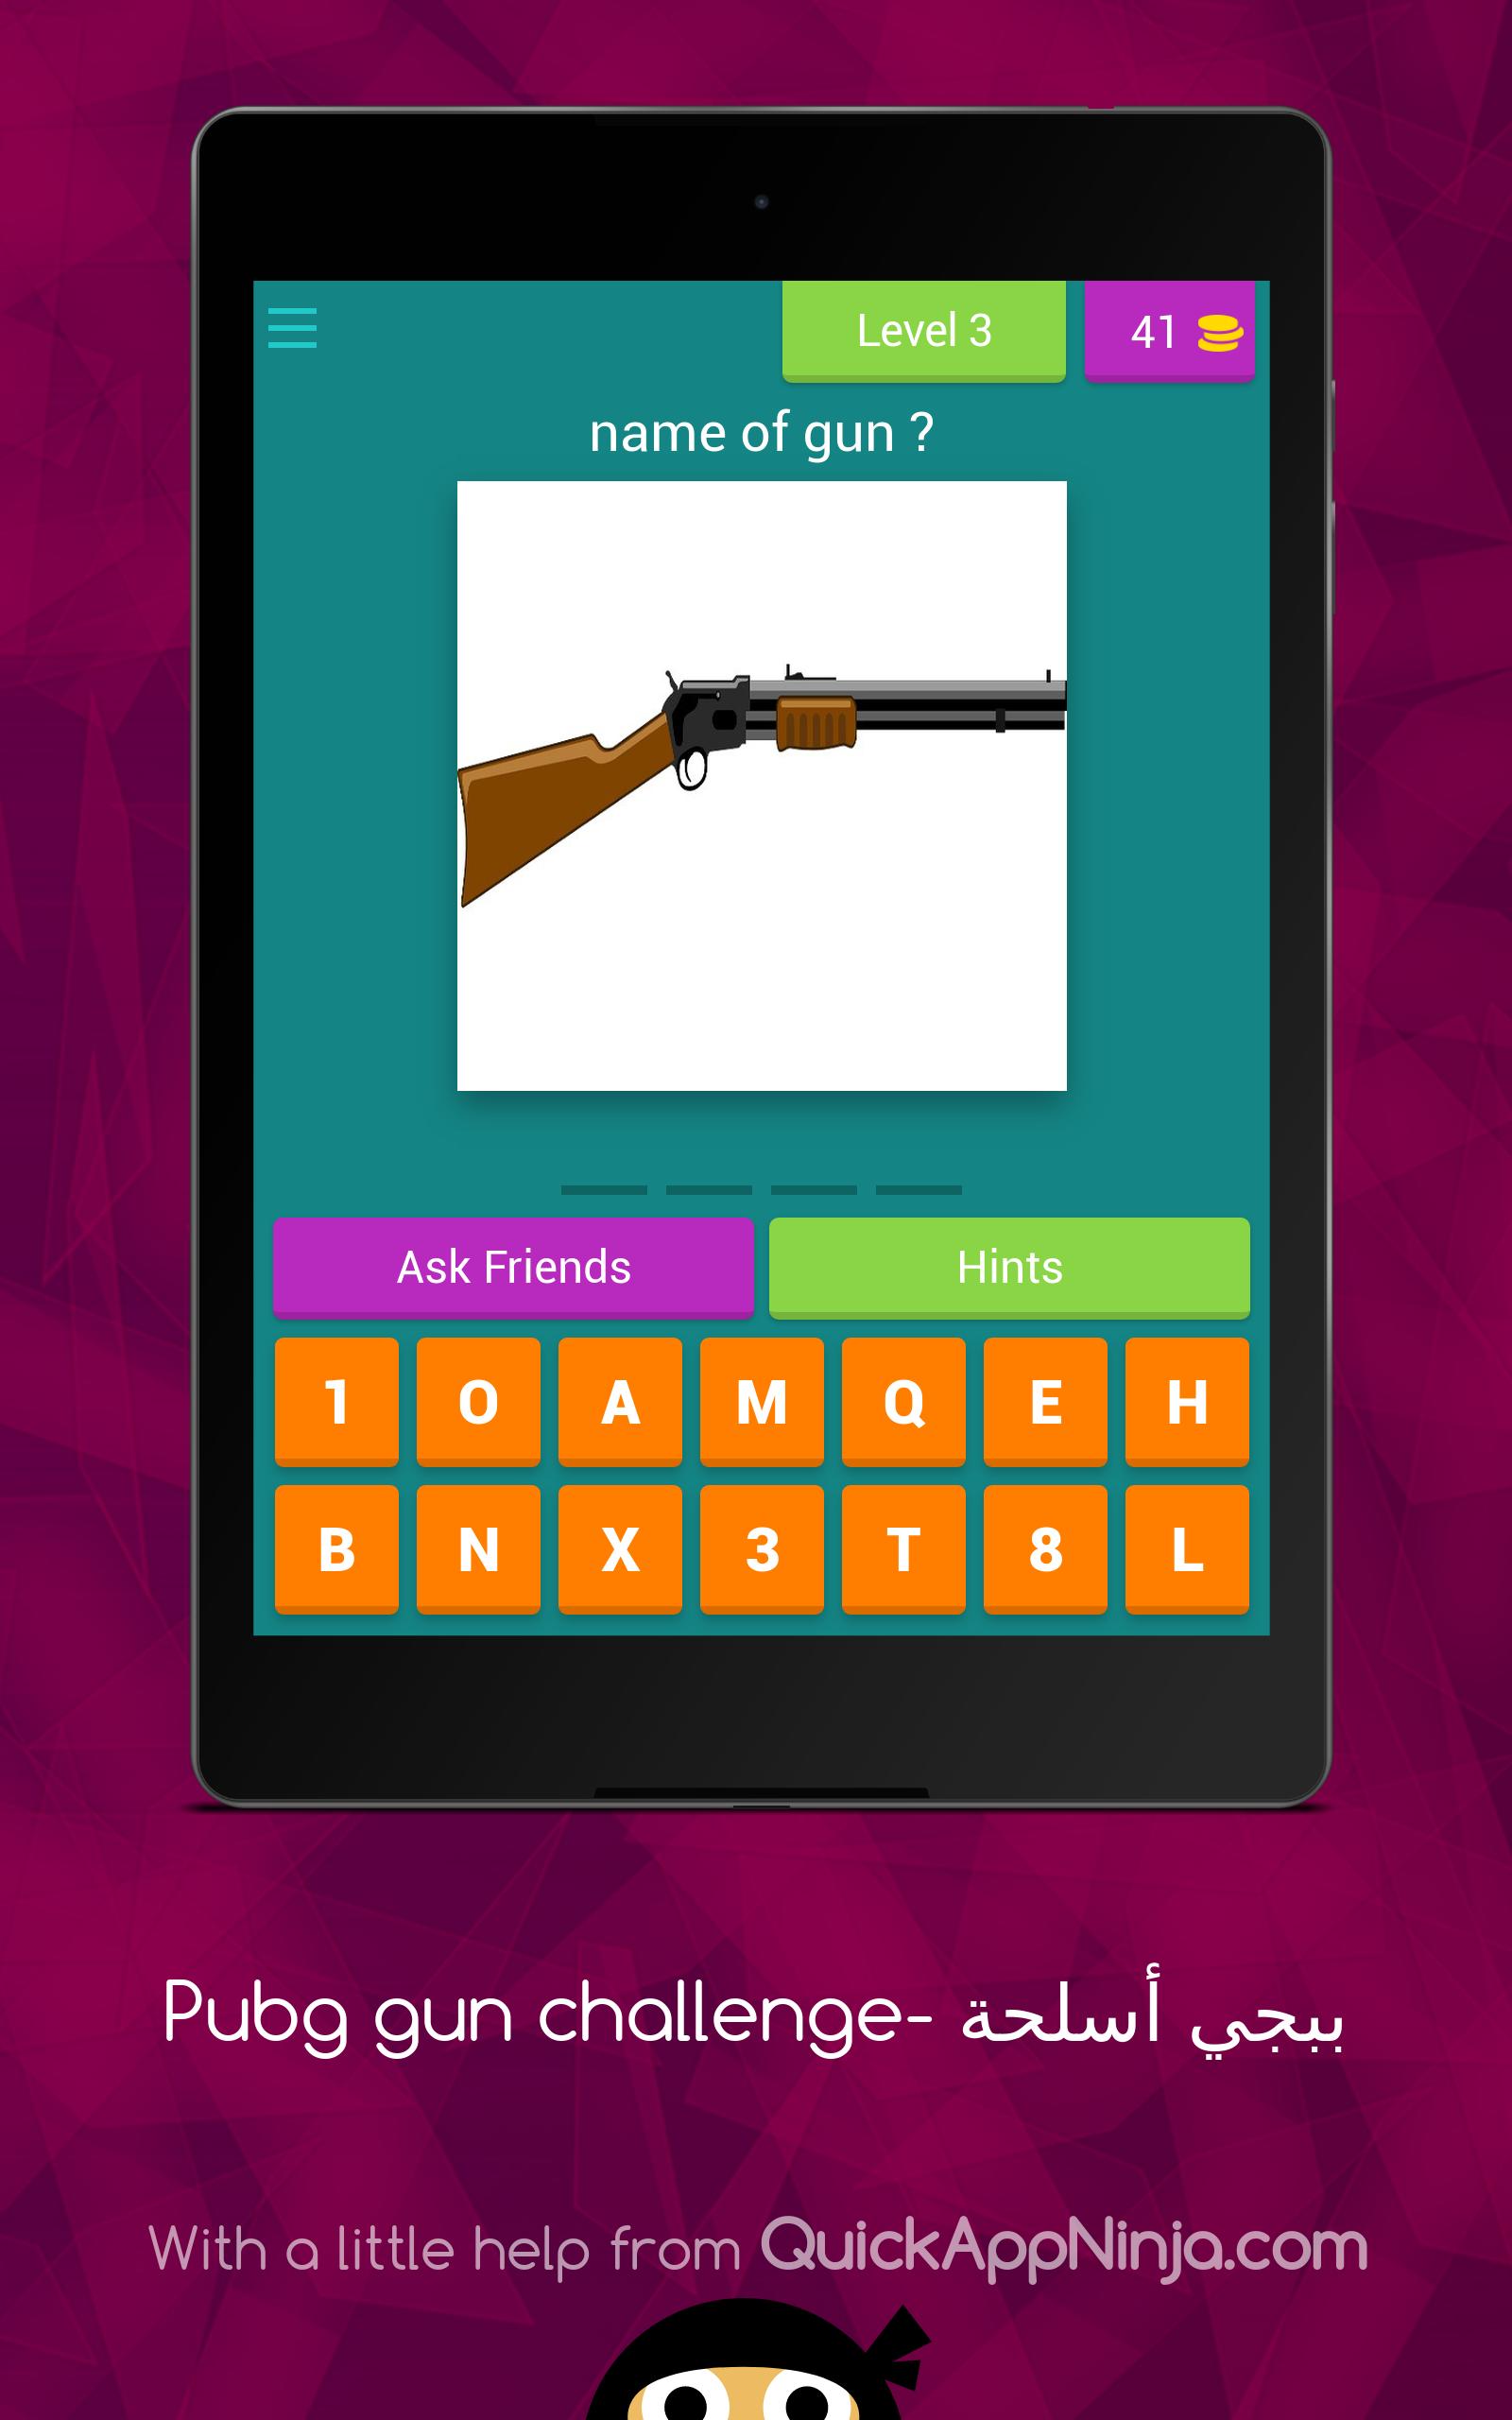 Guess Pubg Guns for Android - APK Download